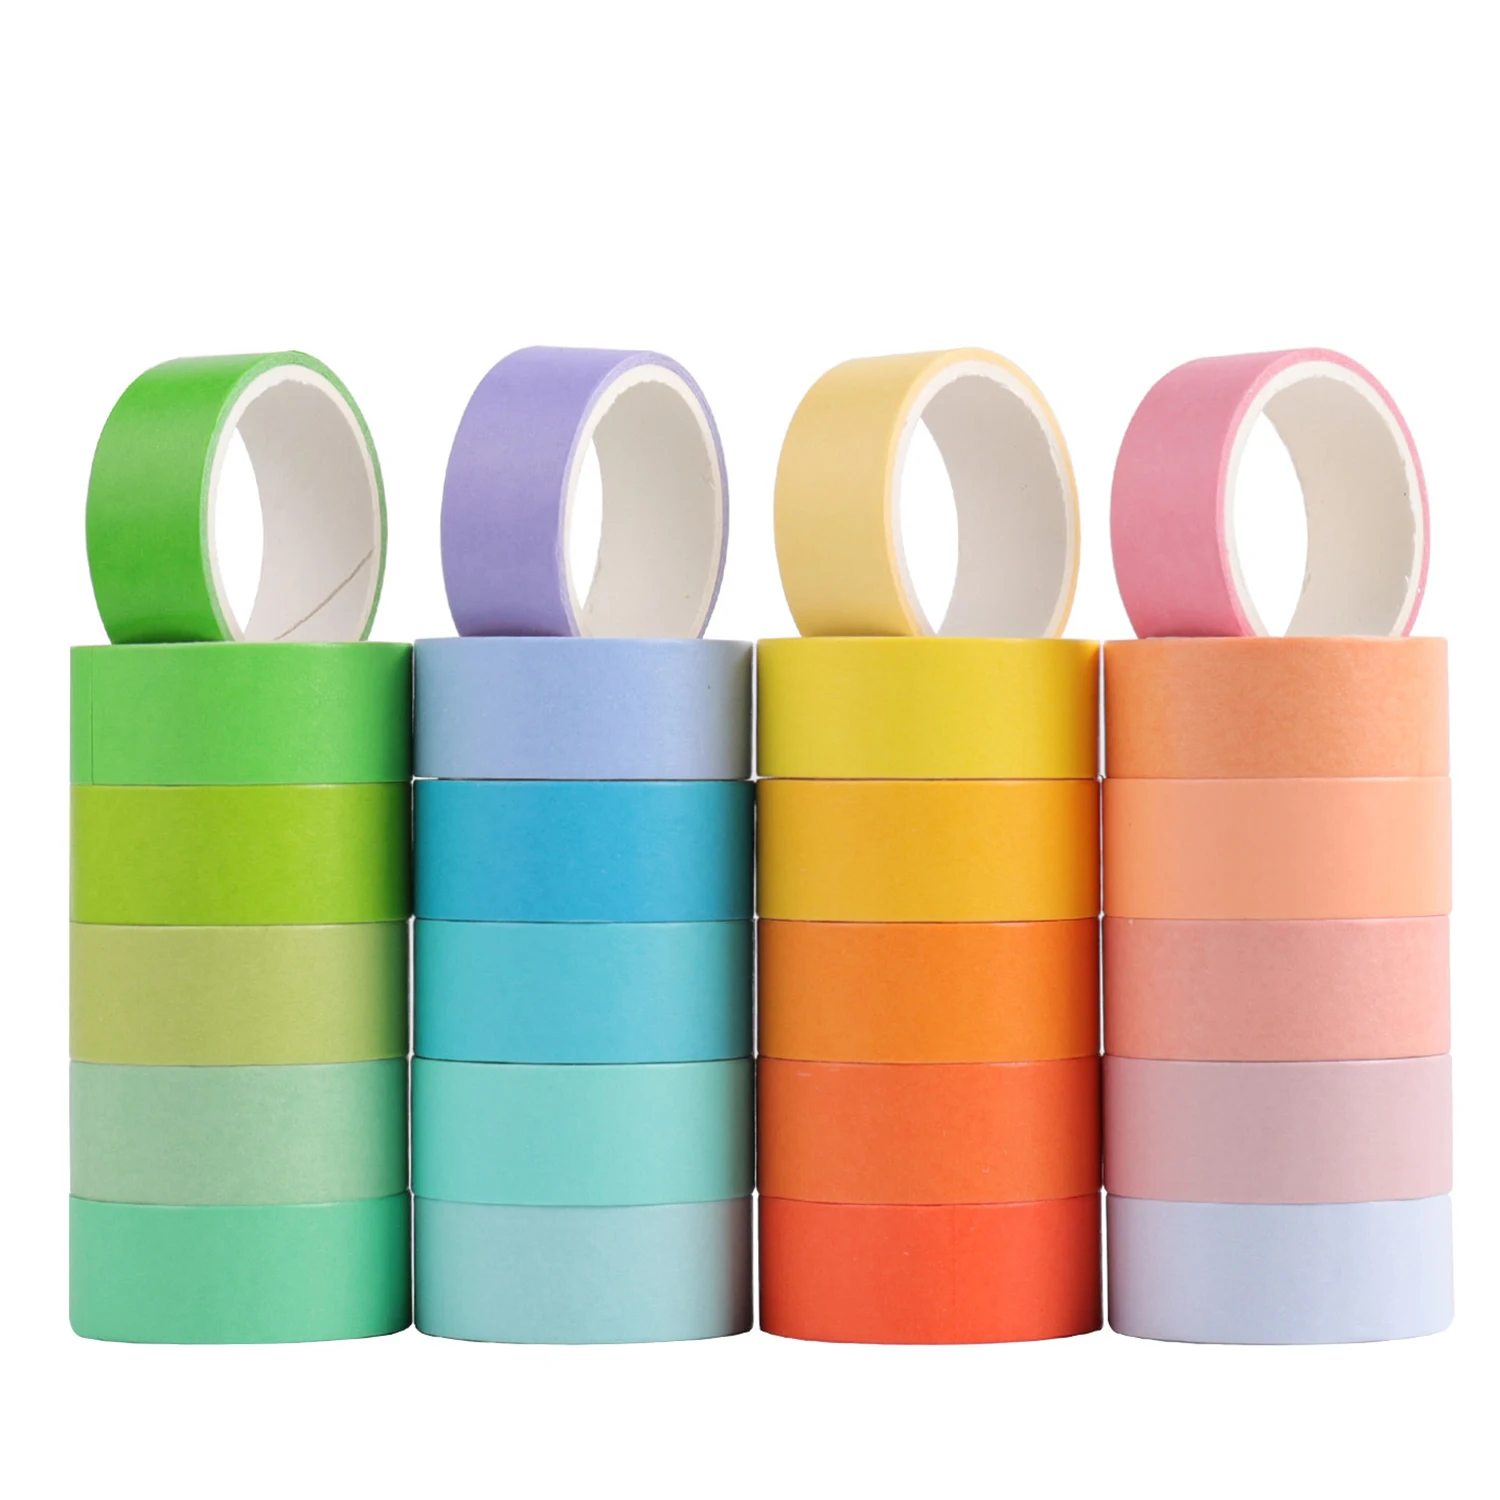 

24 Rolls 15mm Wide Washi Masking Tape Set, Colourful Rainbow Tape Decorative Writable Craft Tape for DIY Scrapbook Designs